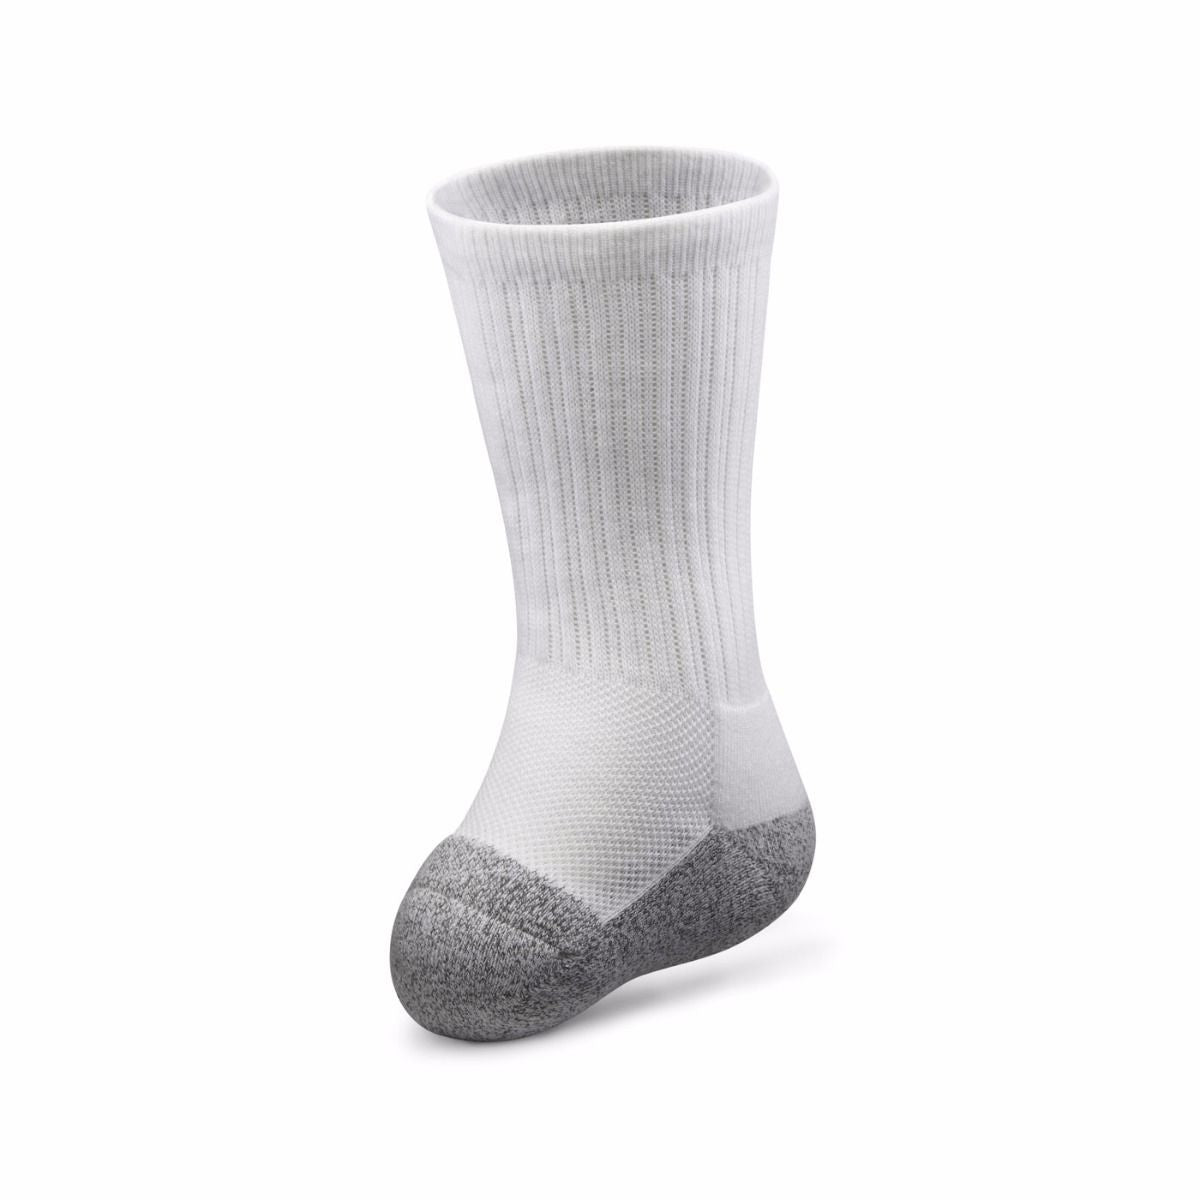 For people with partial foot amputation, sold in a pair with a crew sock.